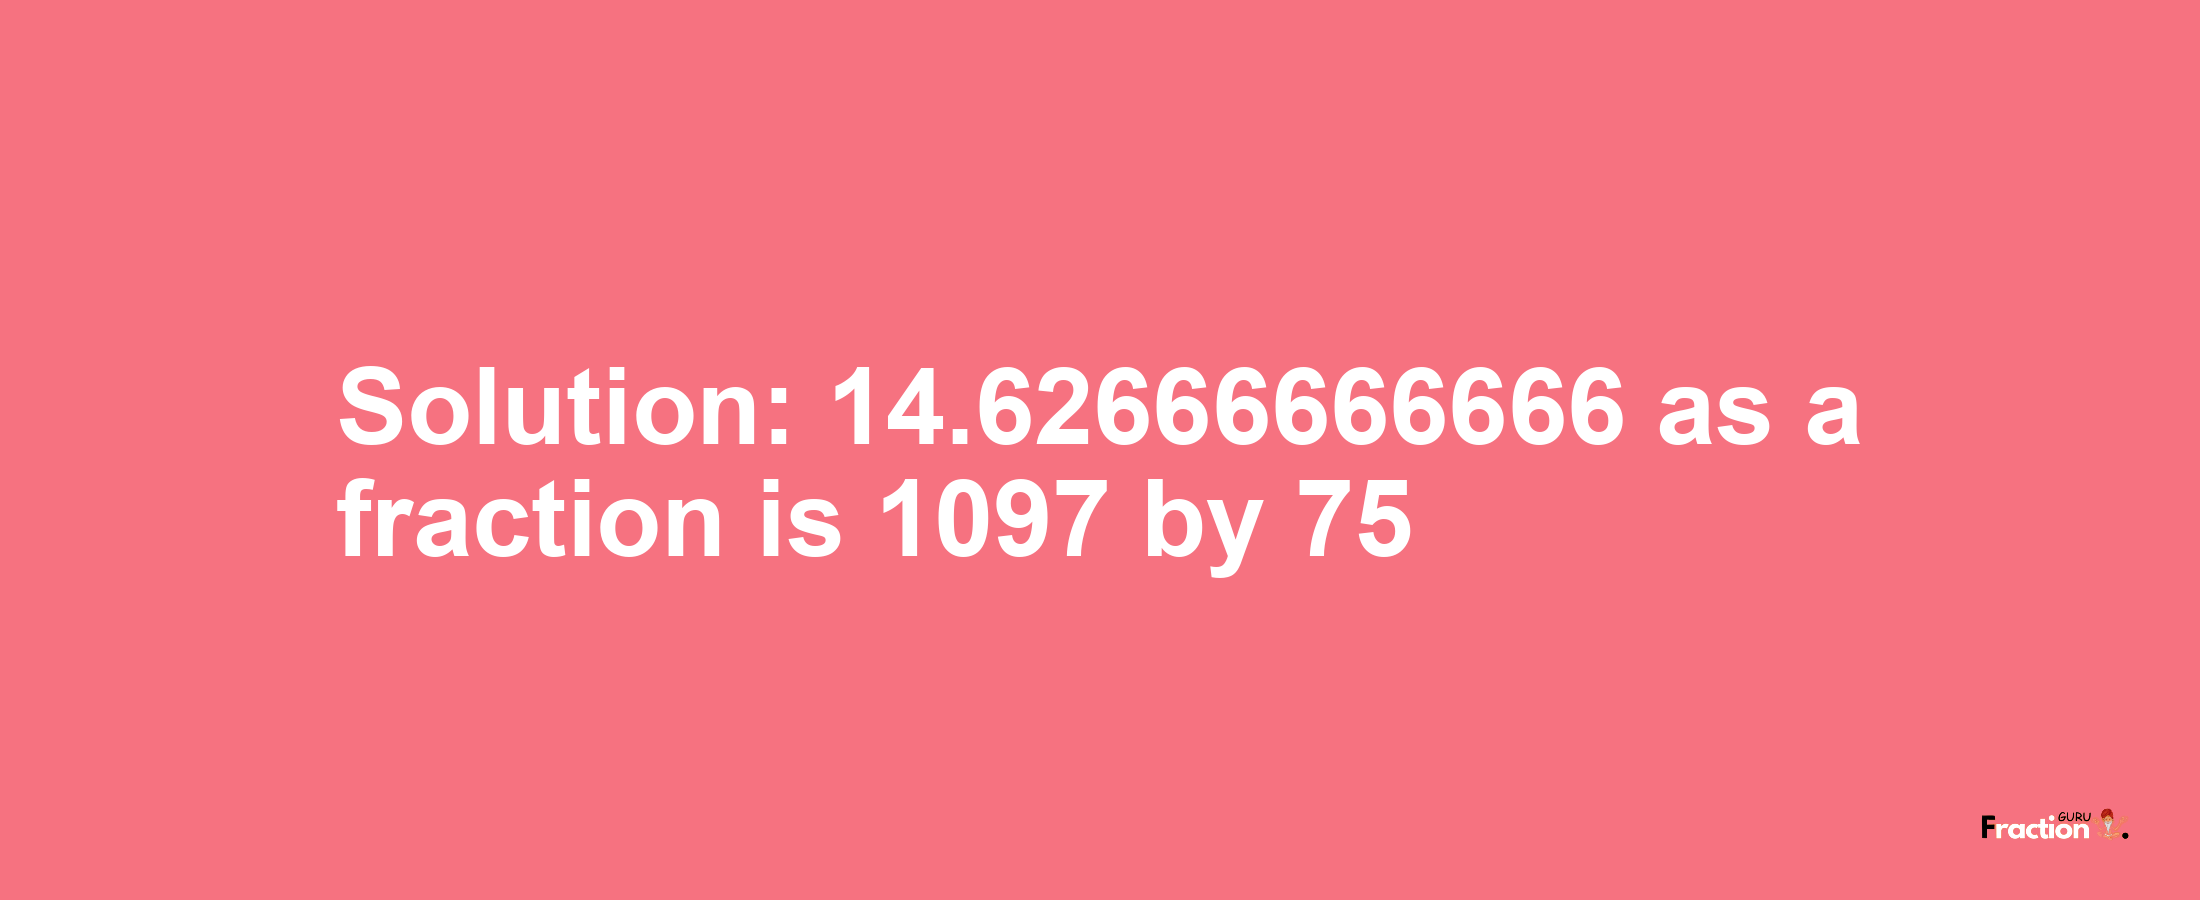 Solution:14.62666666666 as a fraction is 1097/75